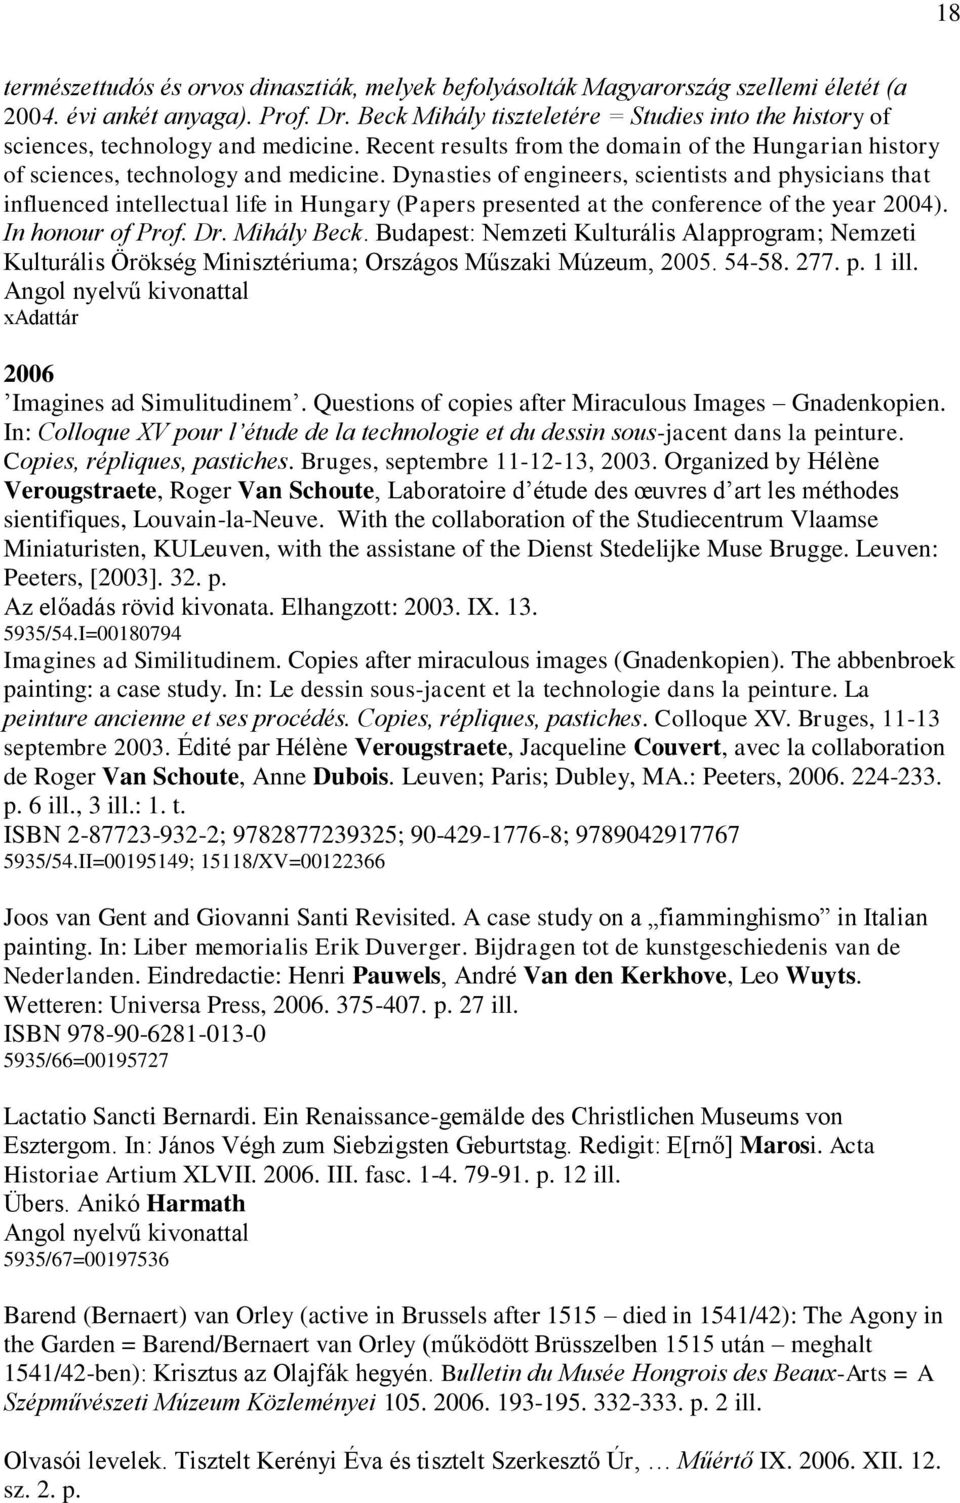 Dynasties of engineers, scientists and physicians that influenced intellectual life in Hungary (Papers presented at the conference of the year 2004). In honour of Prof. Dr. Mihály Beck.